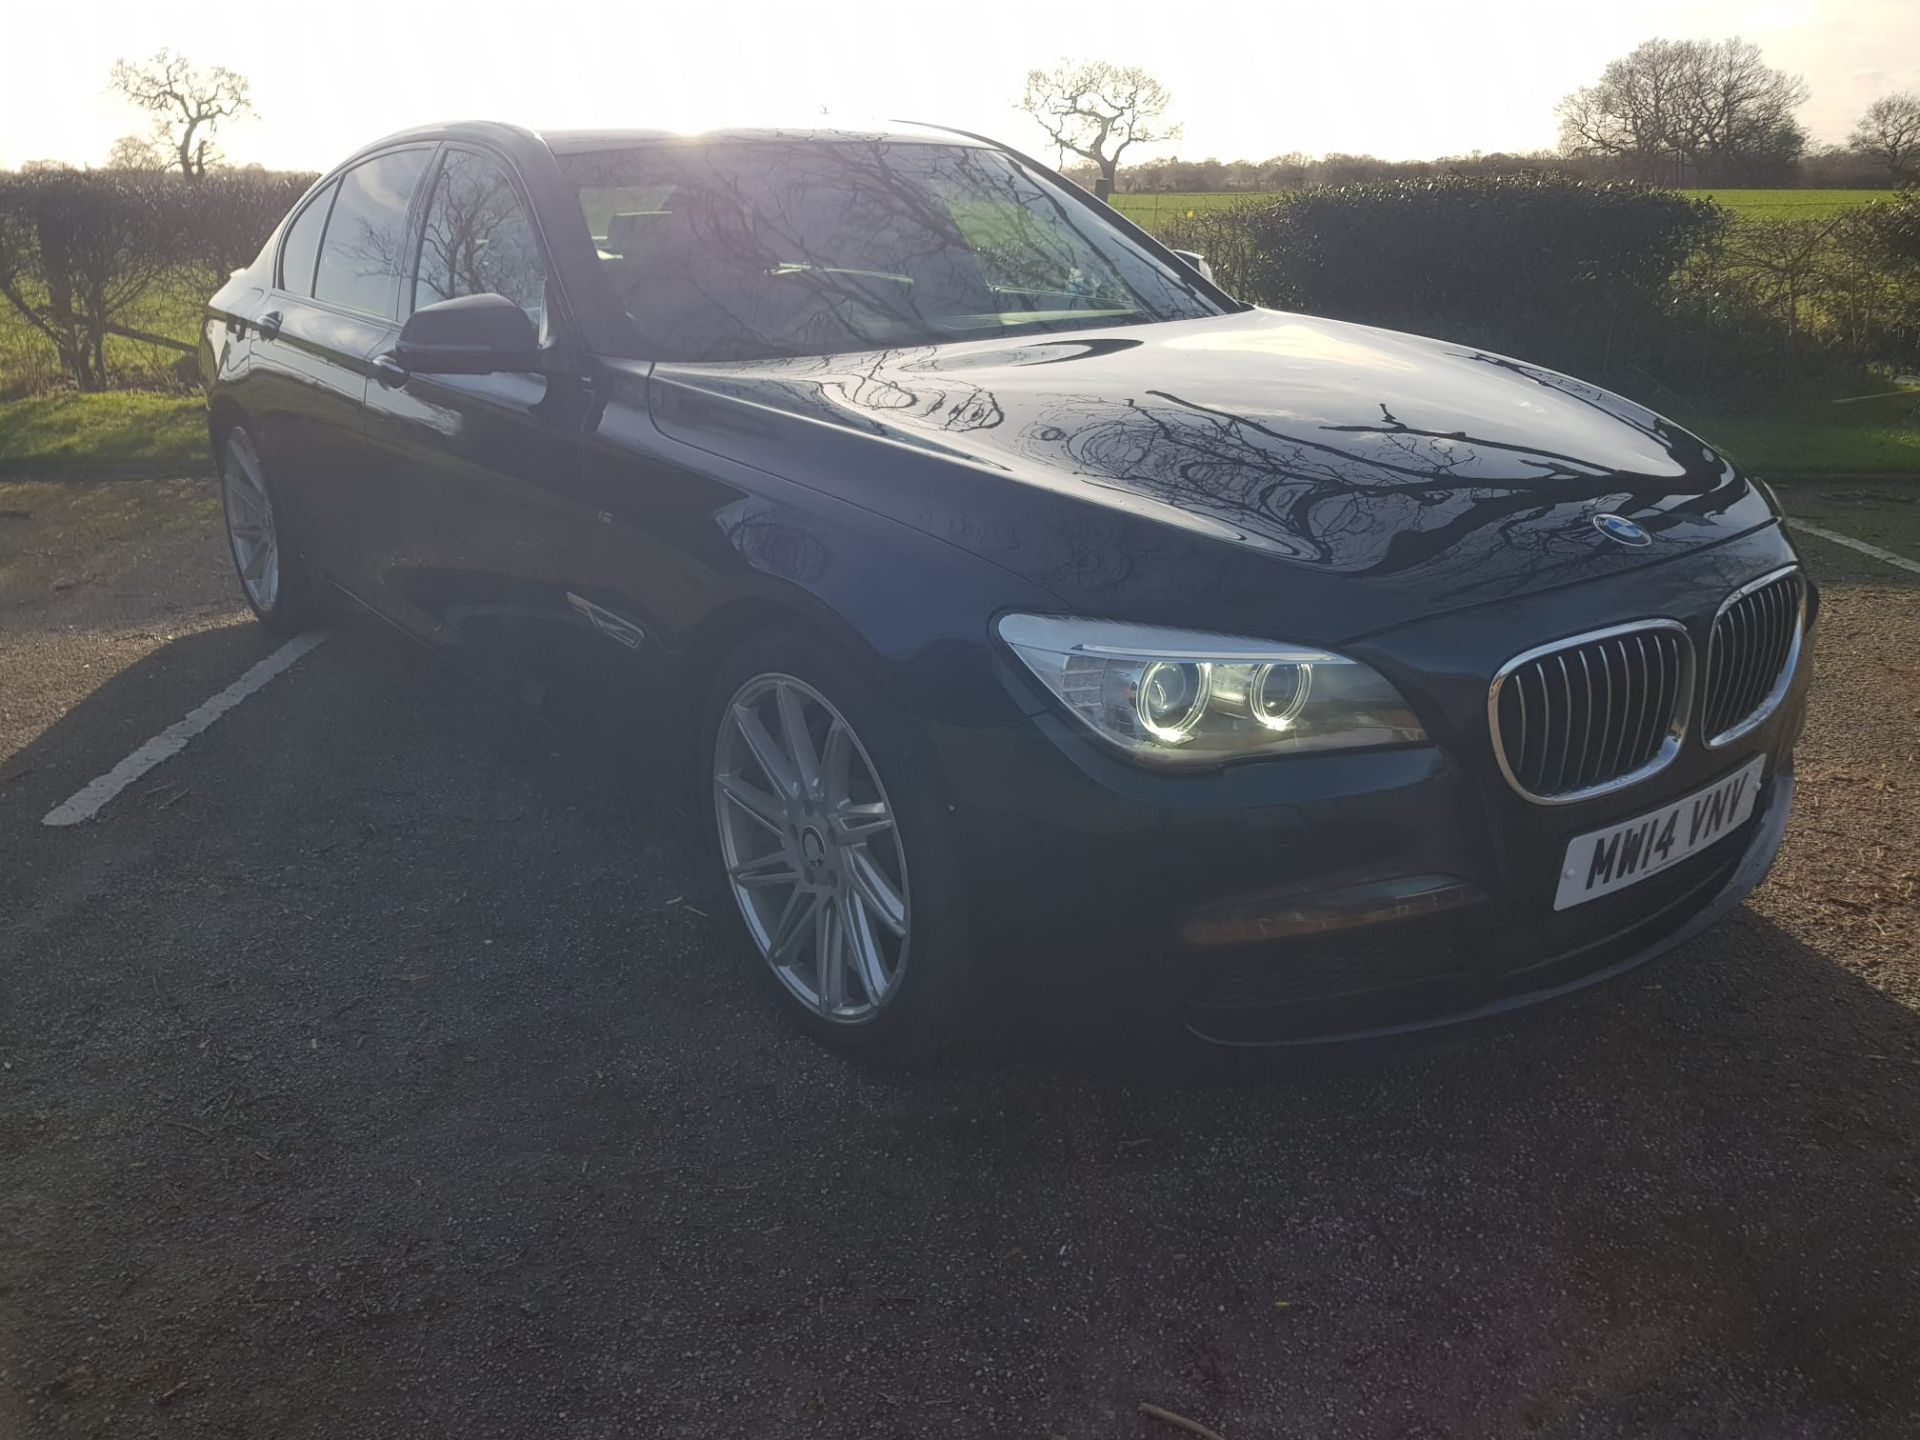 2014 730D M-SPORT SALOON - FULL SERVICE HISTORY - 115K MILES - Image 3 of 43